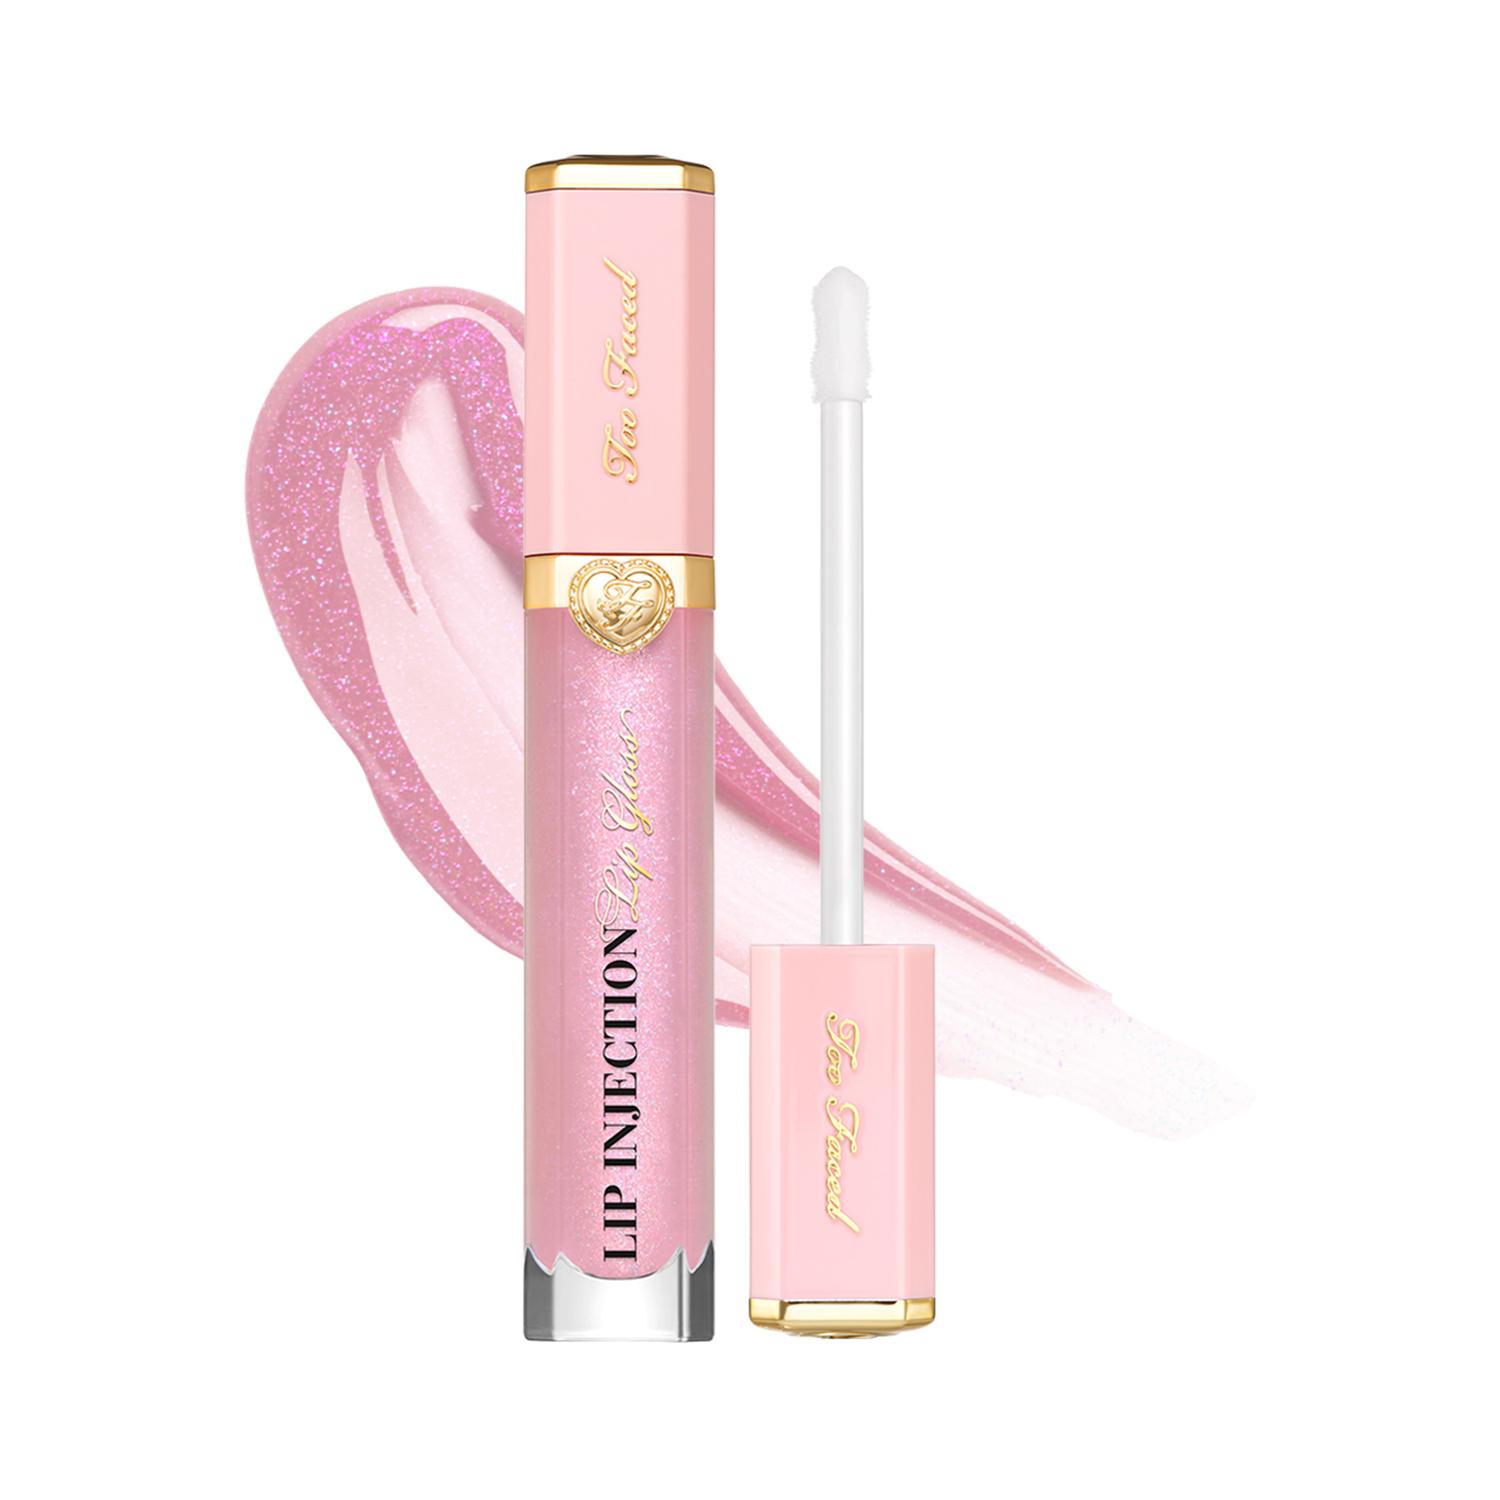 Too Faced | Too Faced Lip Injection Power Plumping Lip Gloss - Pretty Pony (7ml)